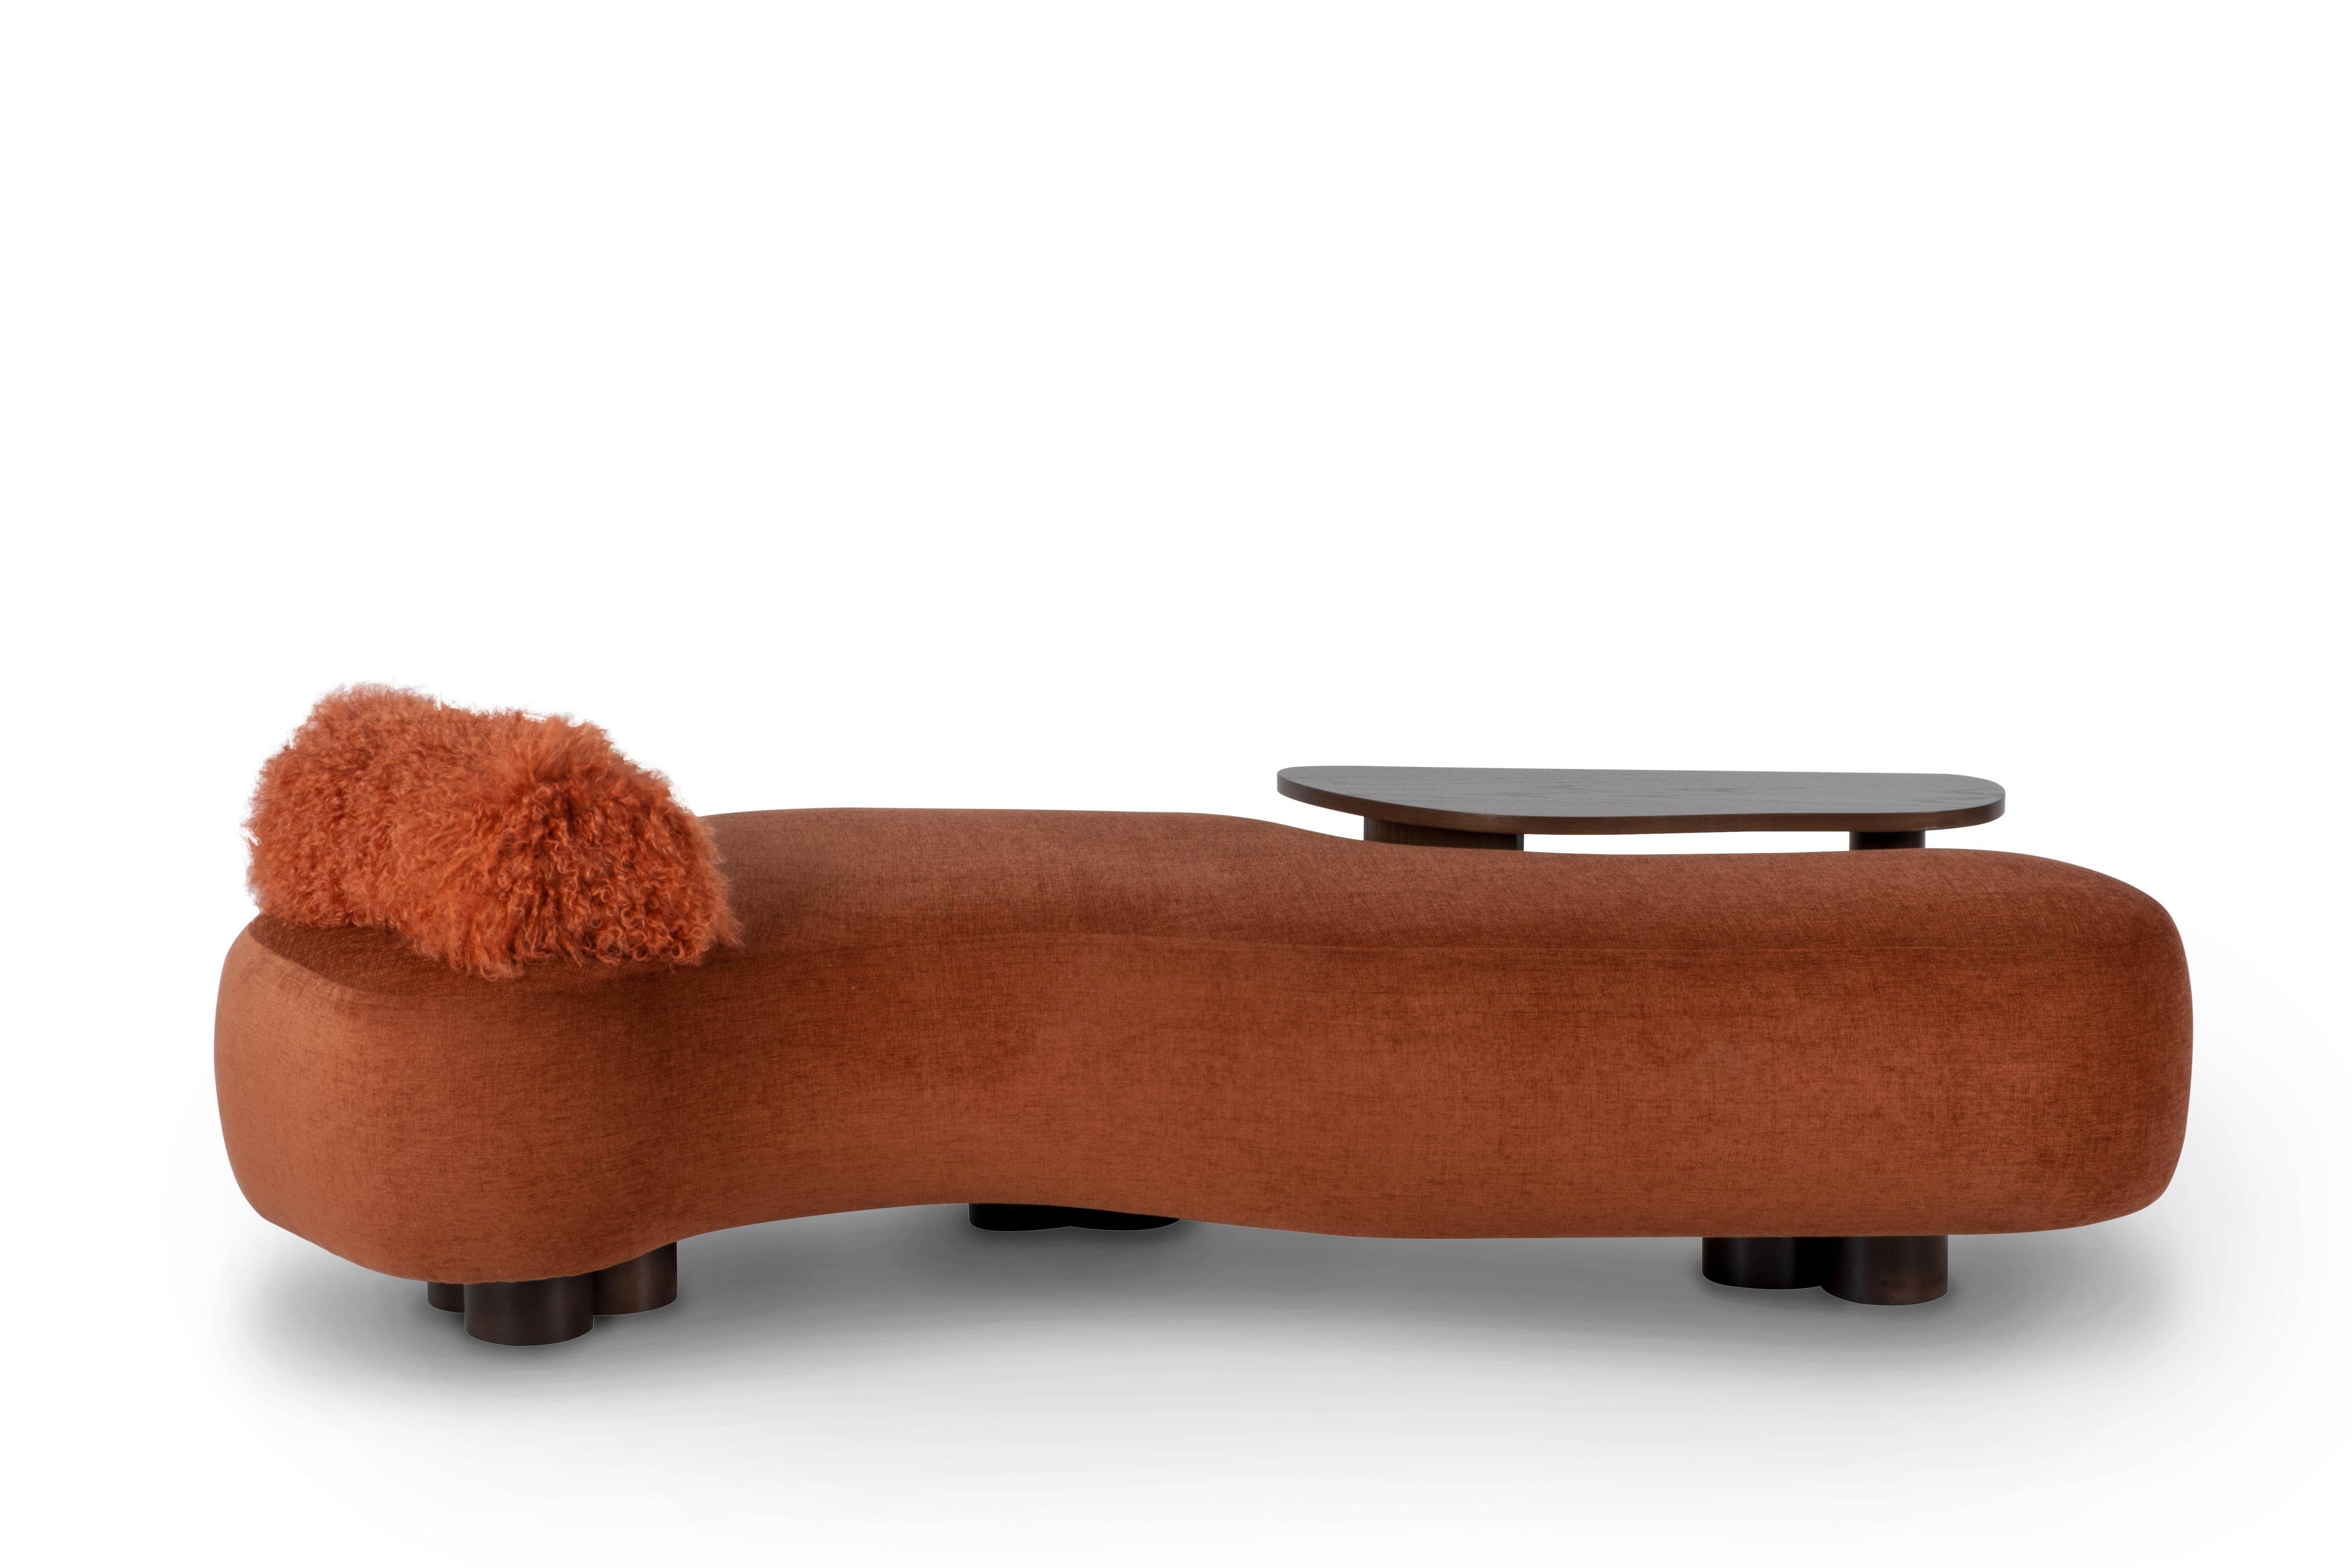 Minho Day Bed, Contemporary Collection, Handcrafted in Portugal - Europe by Greenapple.

Designed by Rute Martins for the Contemporary Collection, the Minho day bed with a wooden side table is a modern interpretation of the traditional furniture